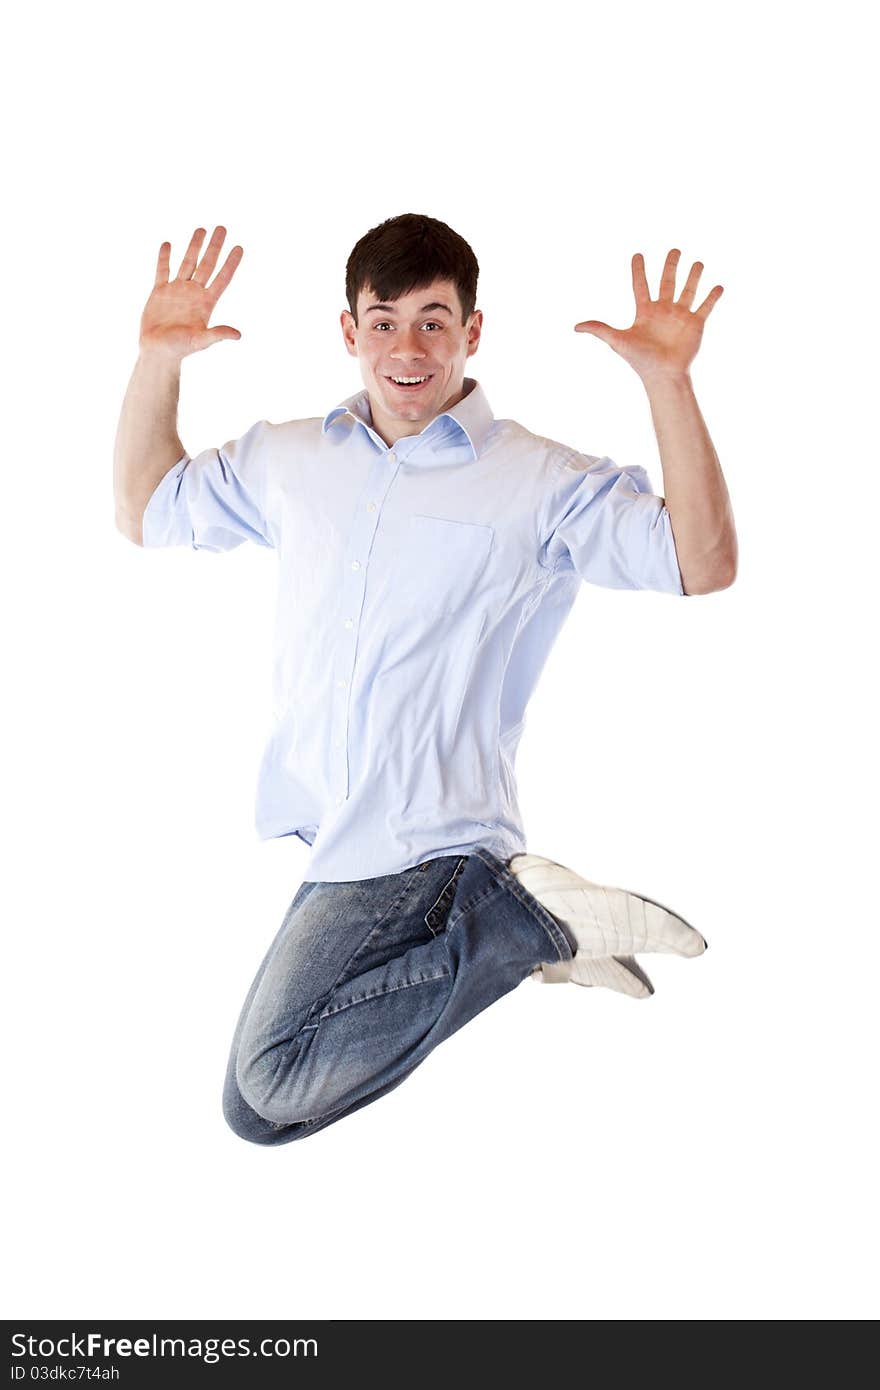 Young dynamic sportive man jumps high in the air.Isolated on white background.